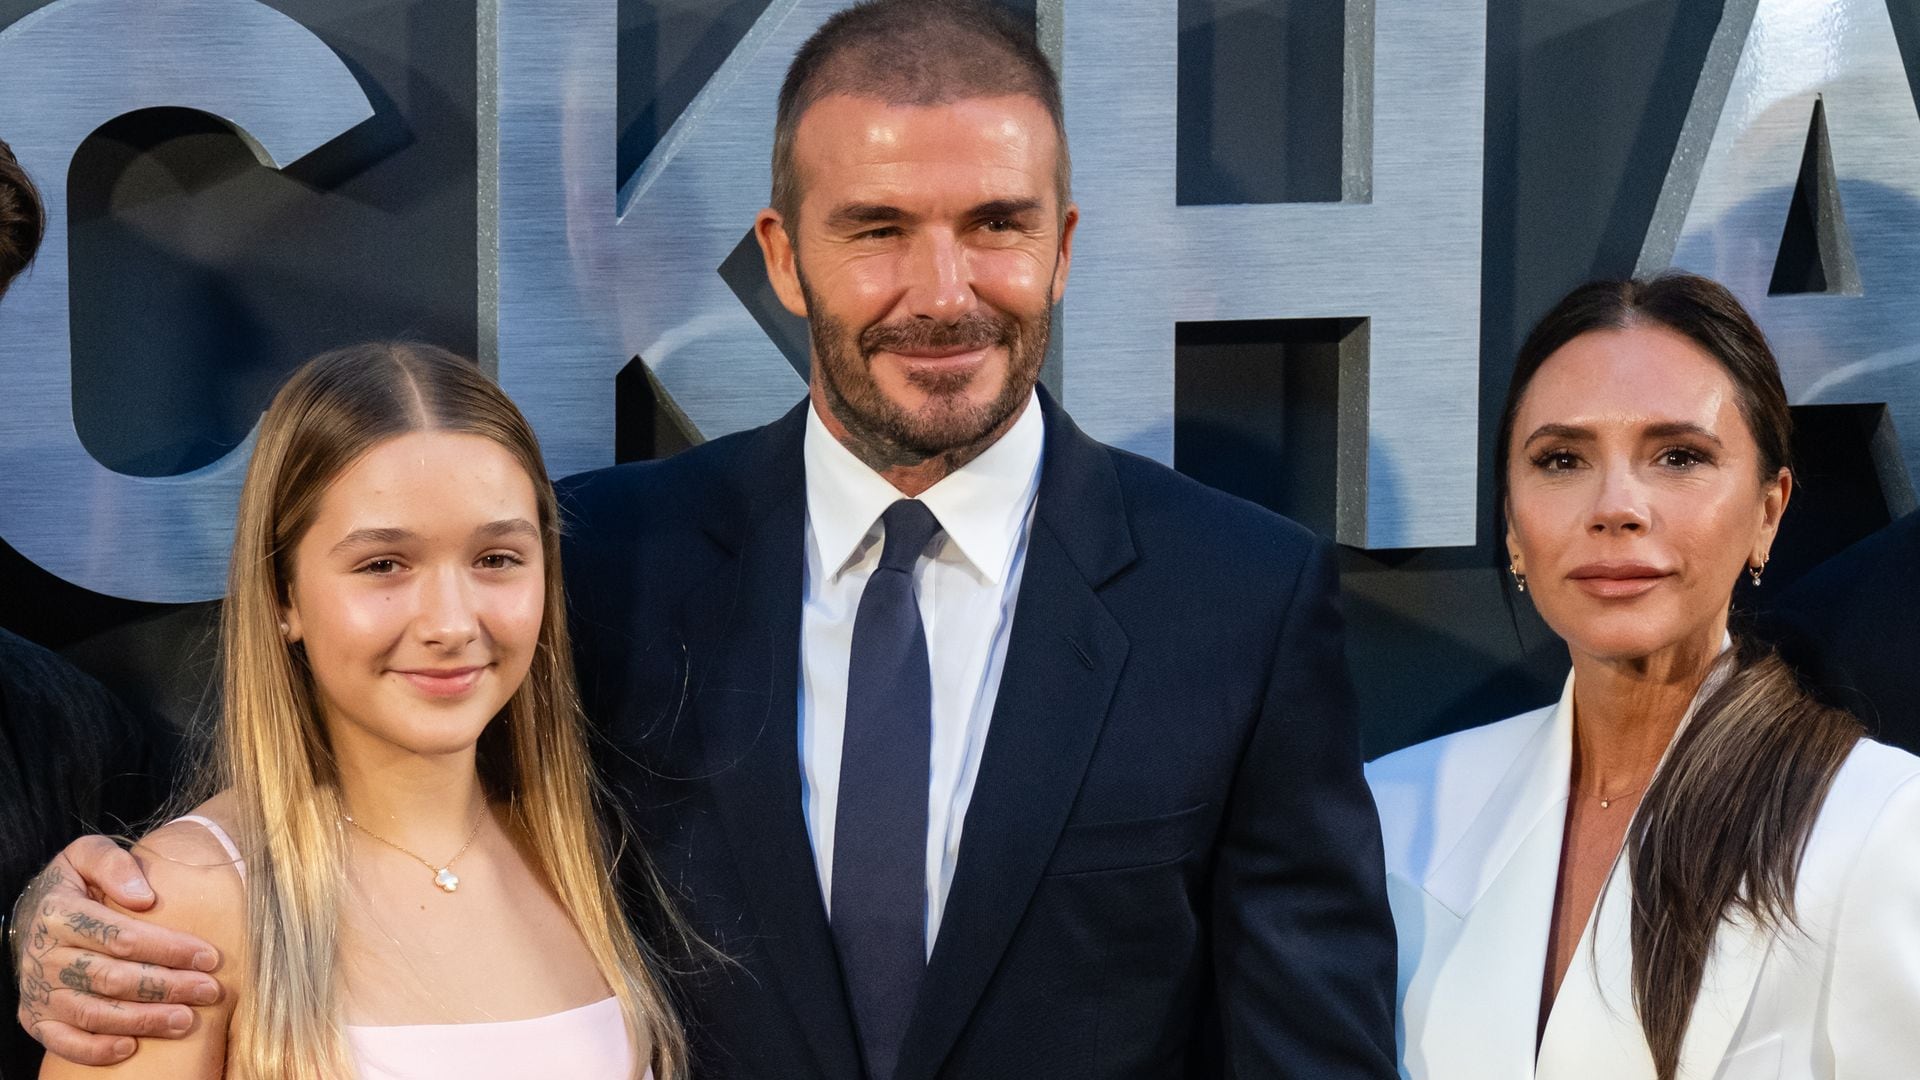 The Beckhams celebrate Harper's birthday by showering her with love